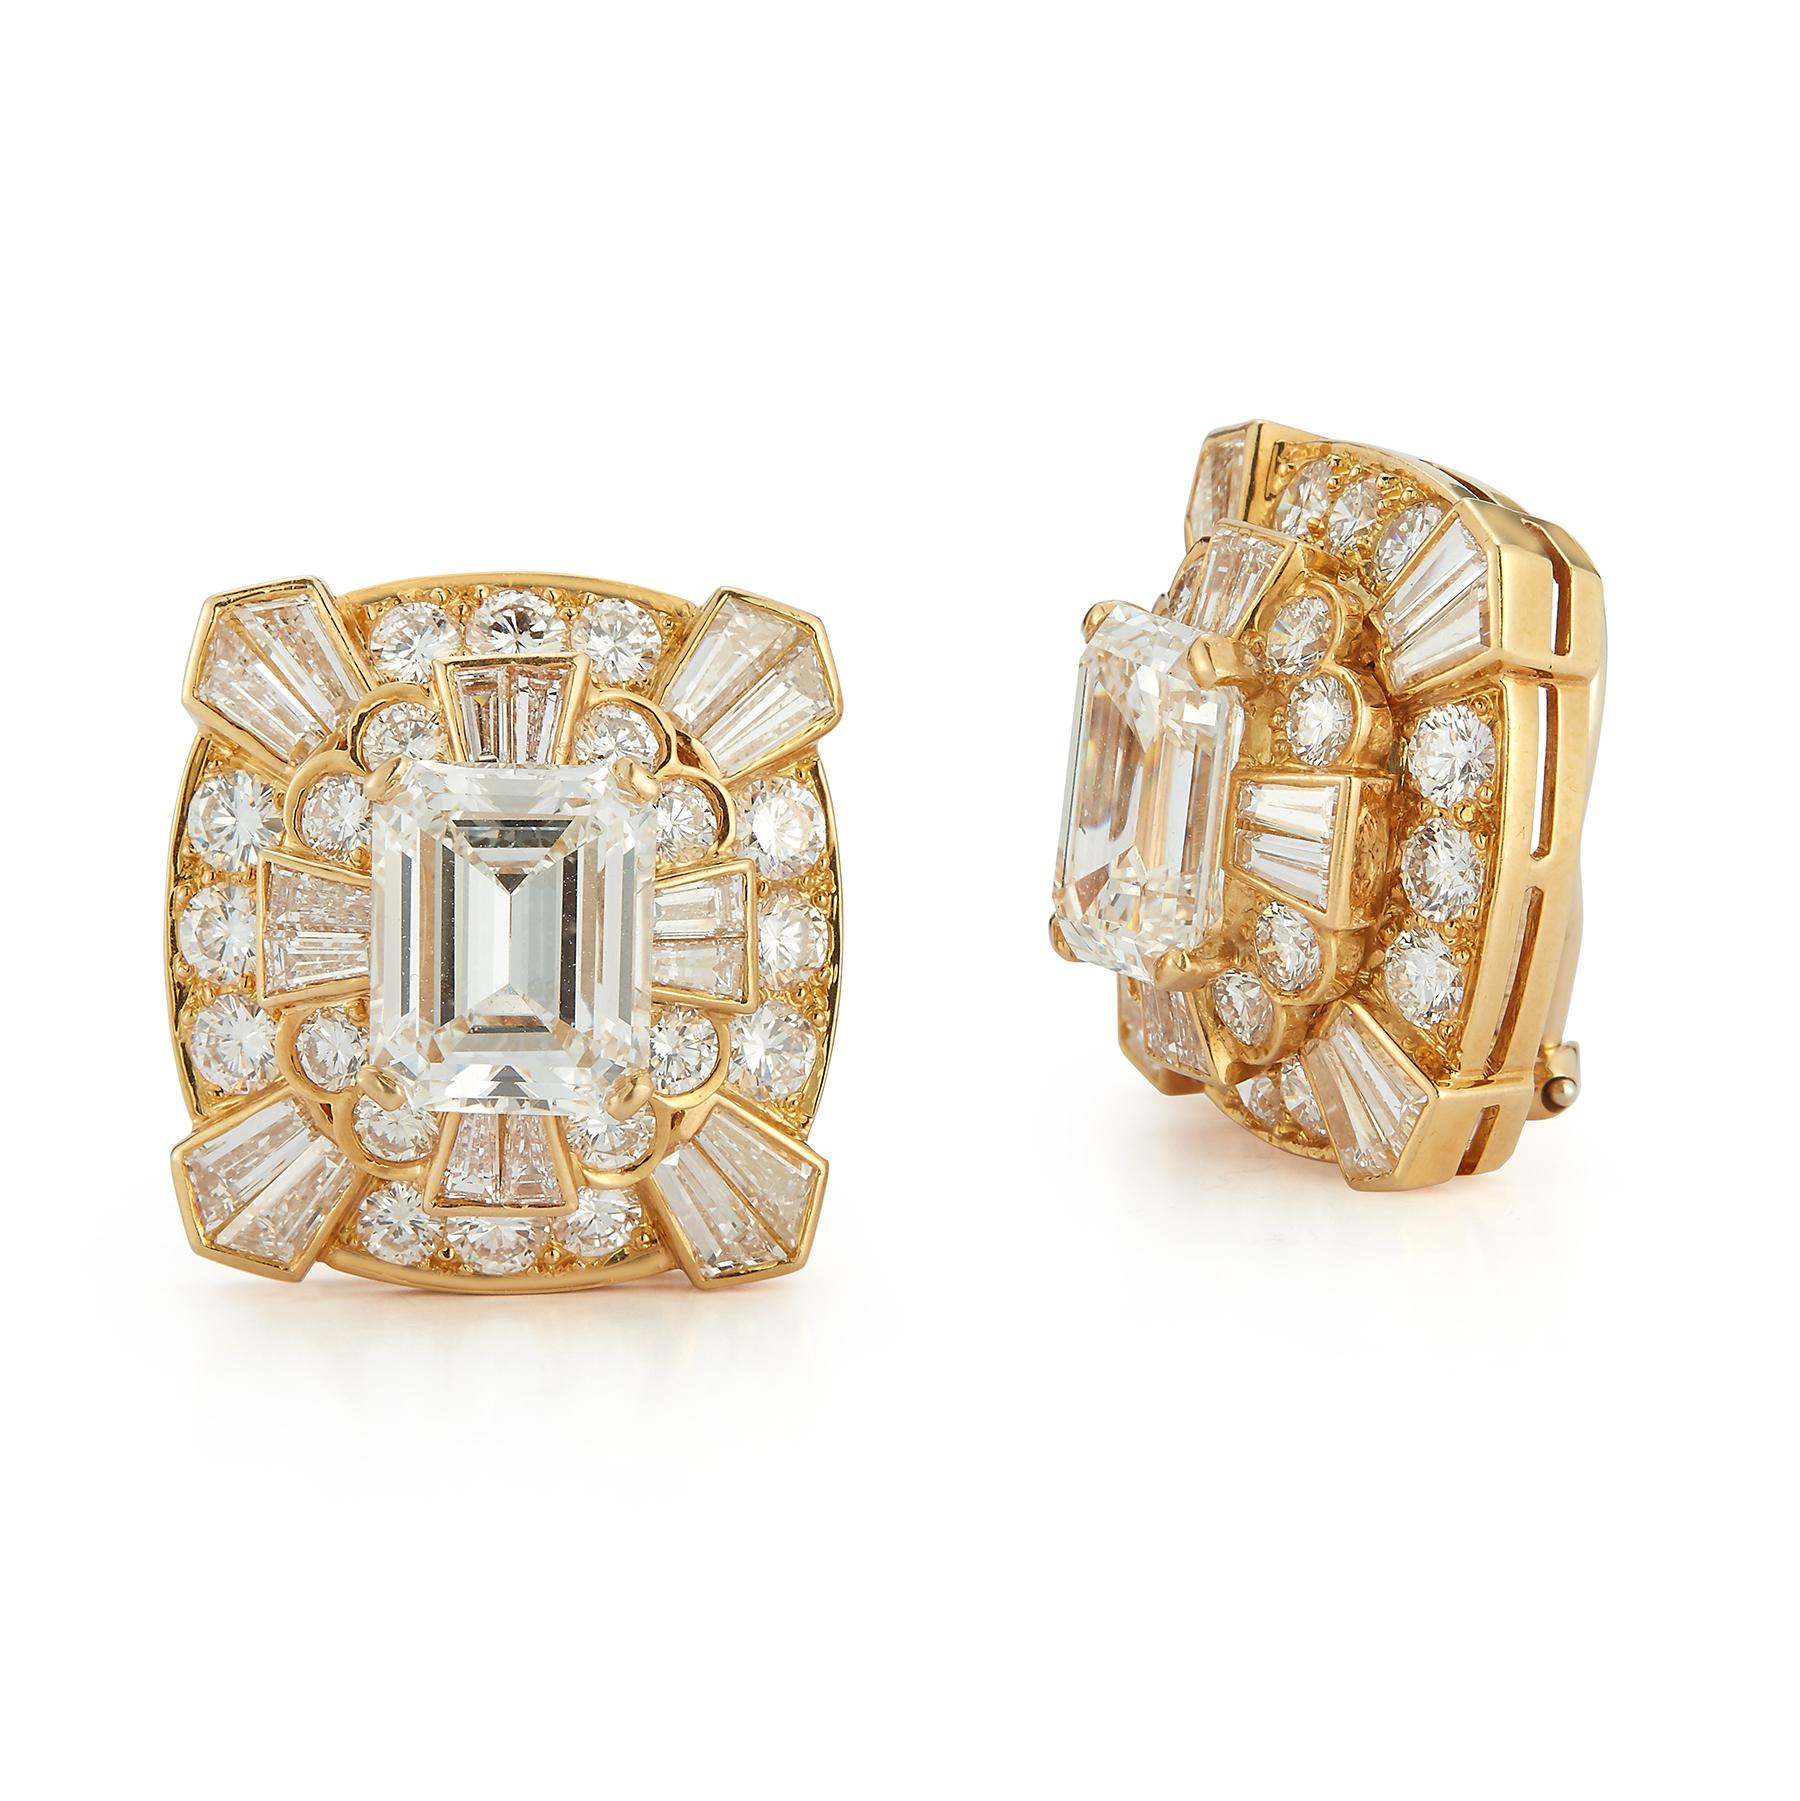 Van Cleef & Arpels Emerald Cut Diamond Earrings

GIA certified emerald cut diamonds:
Emerald Diamond Weight: 3.79 cts & 3.80 cts 
Emerald Diamond Color: F
Emerald Diamond Clarity : VS1

surrounded by 32 tapered baguette-cut, with an approximate